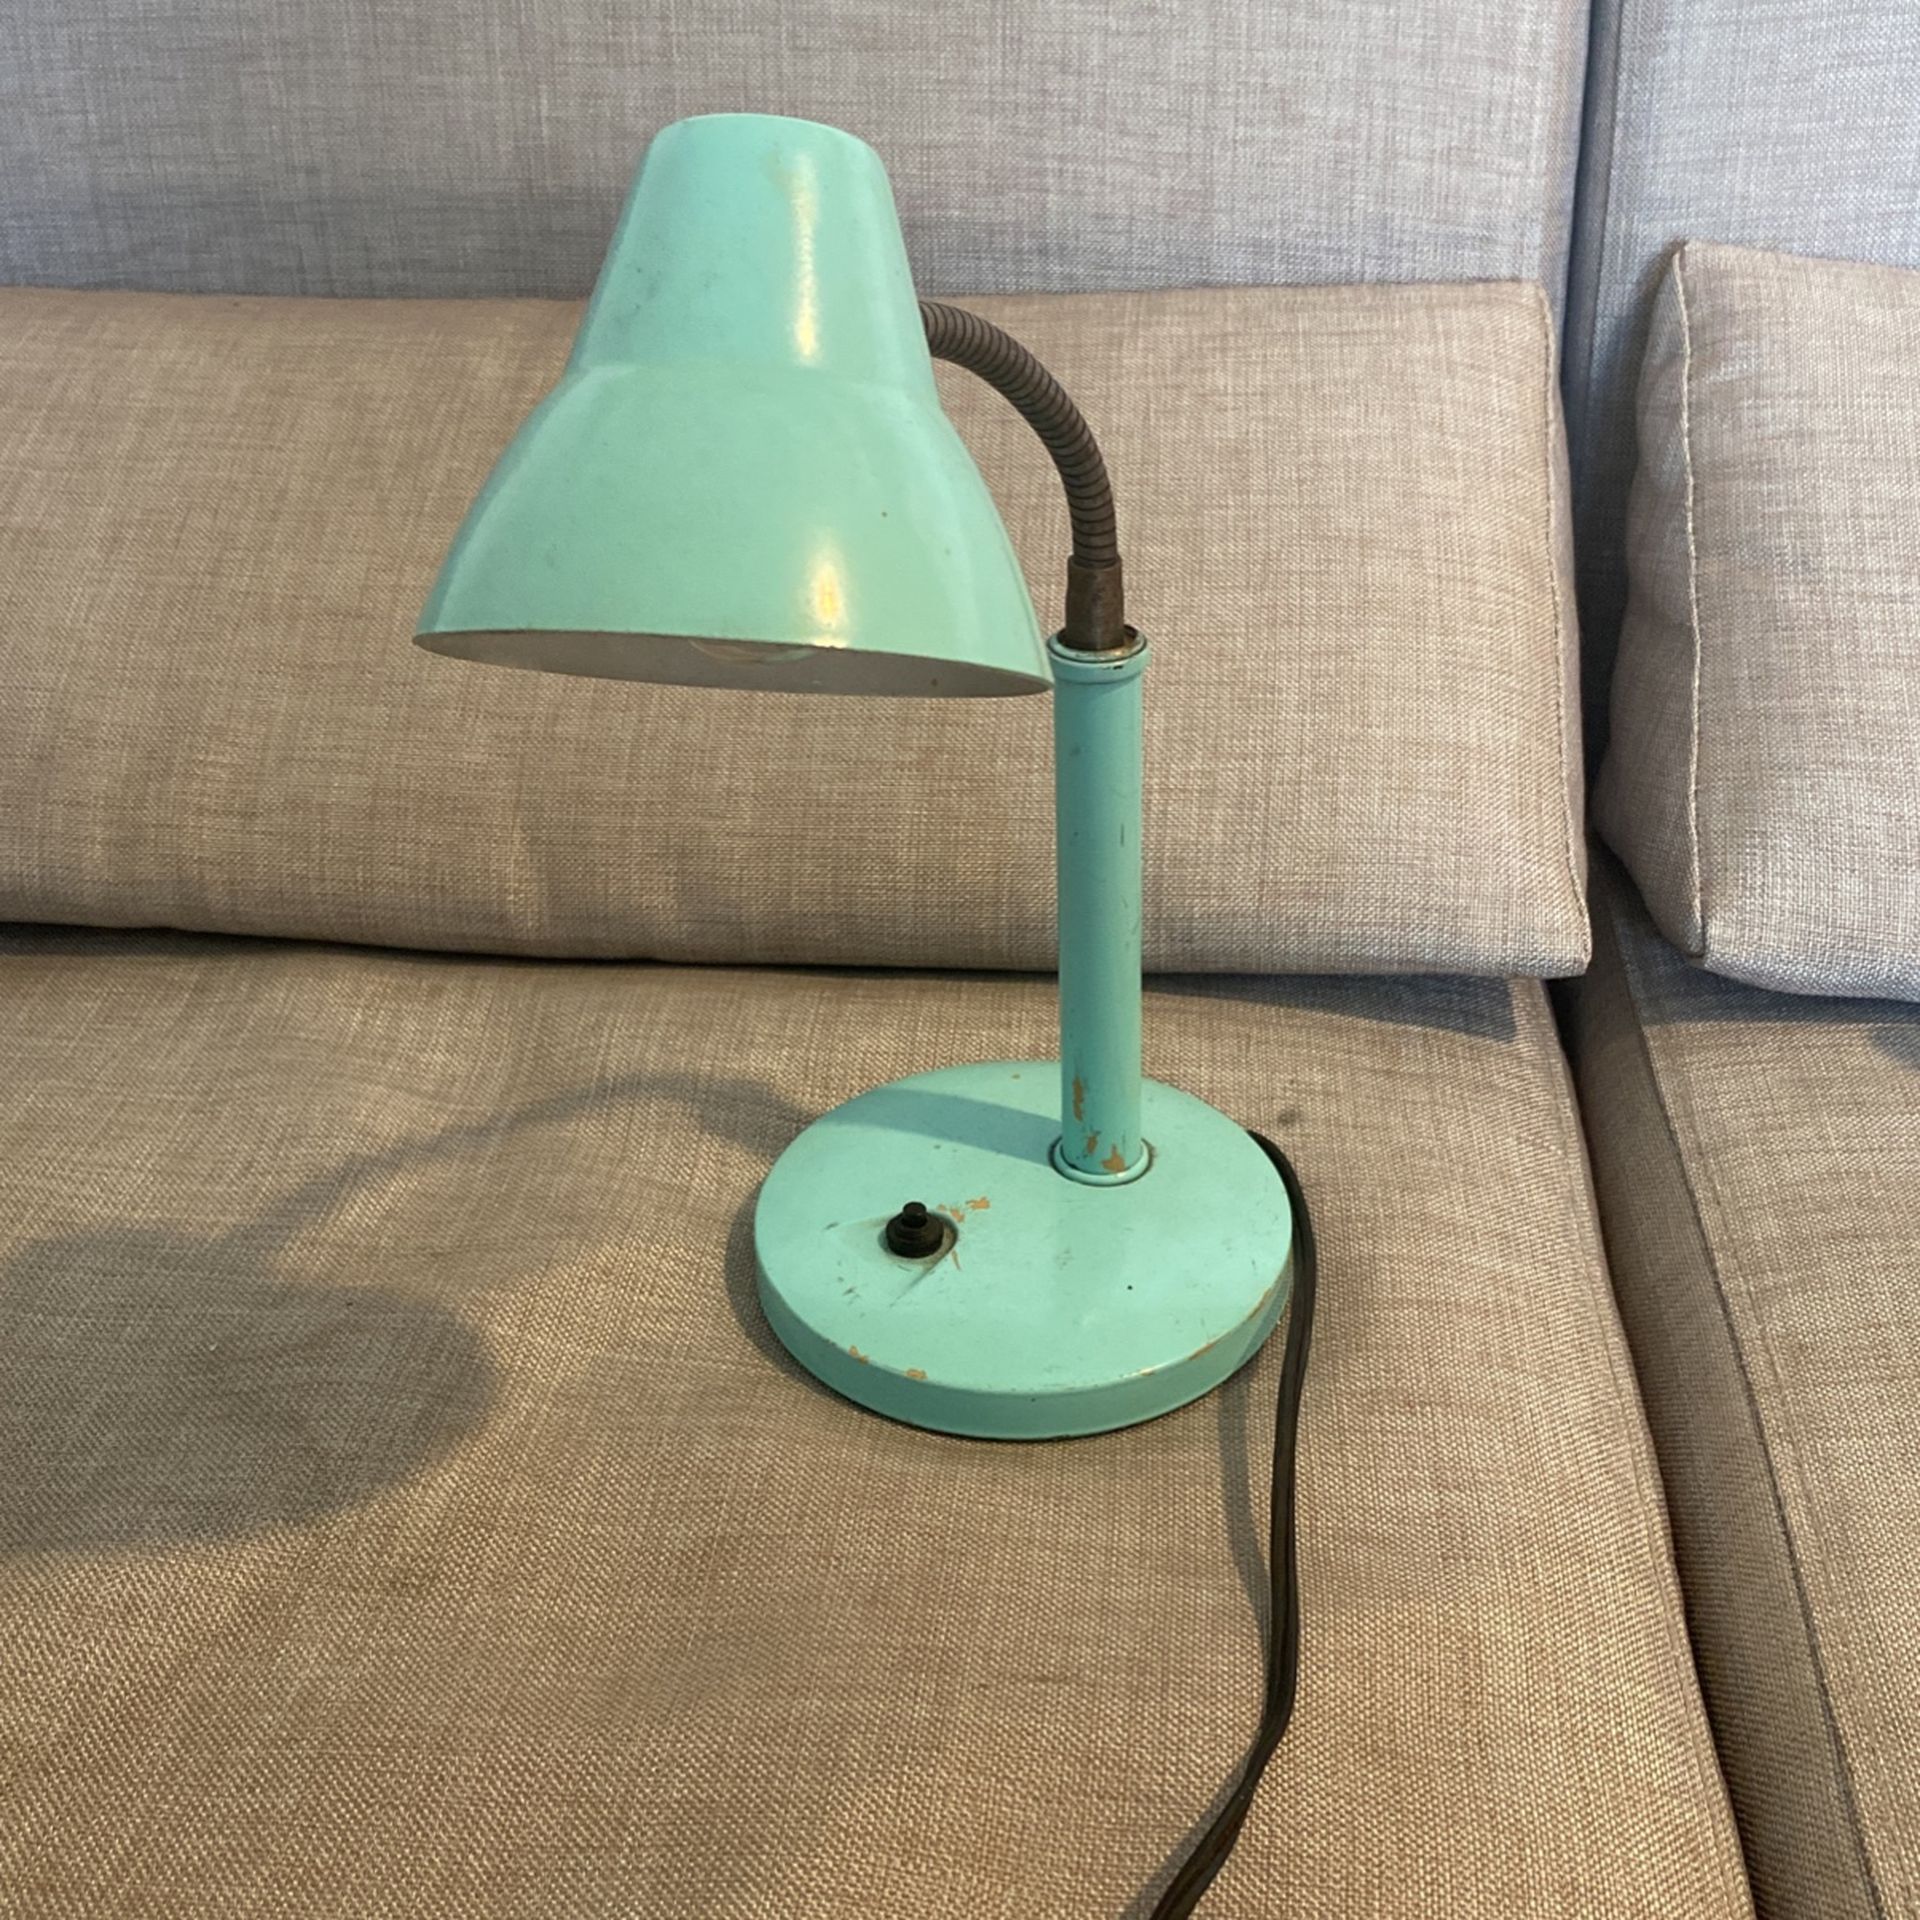 Vintage Turquoise Table Lamp